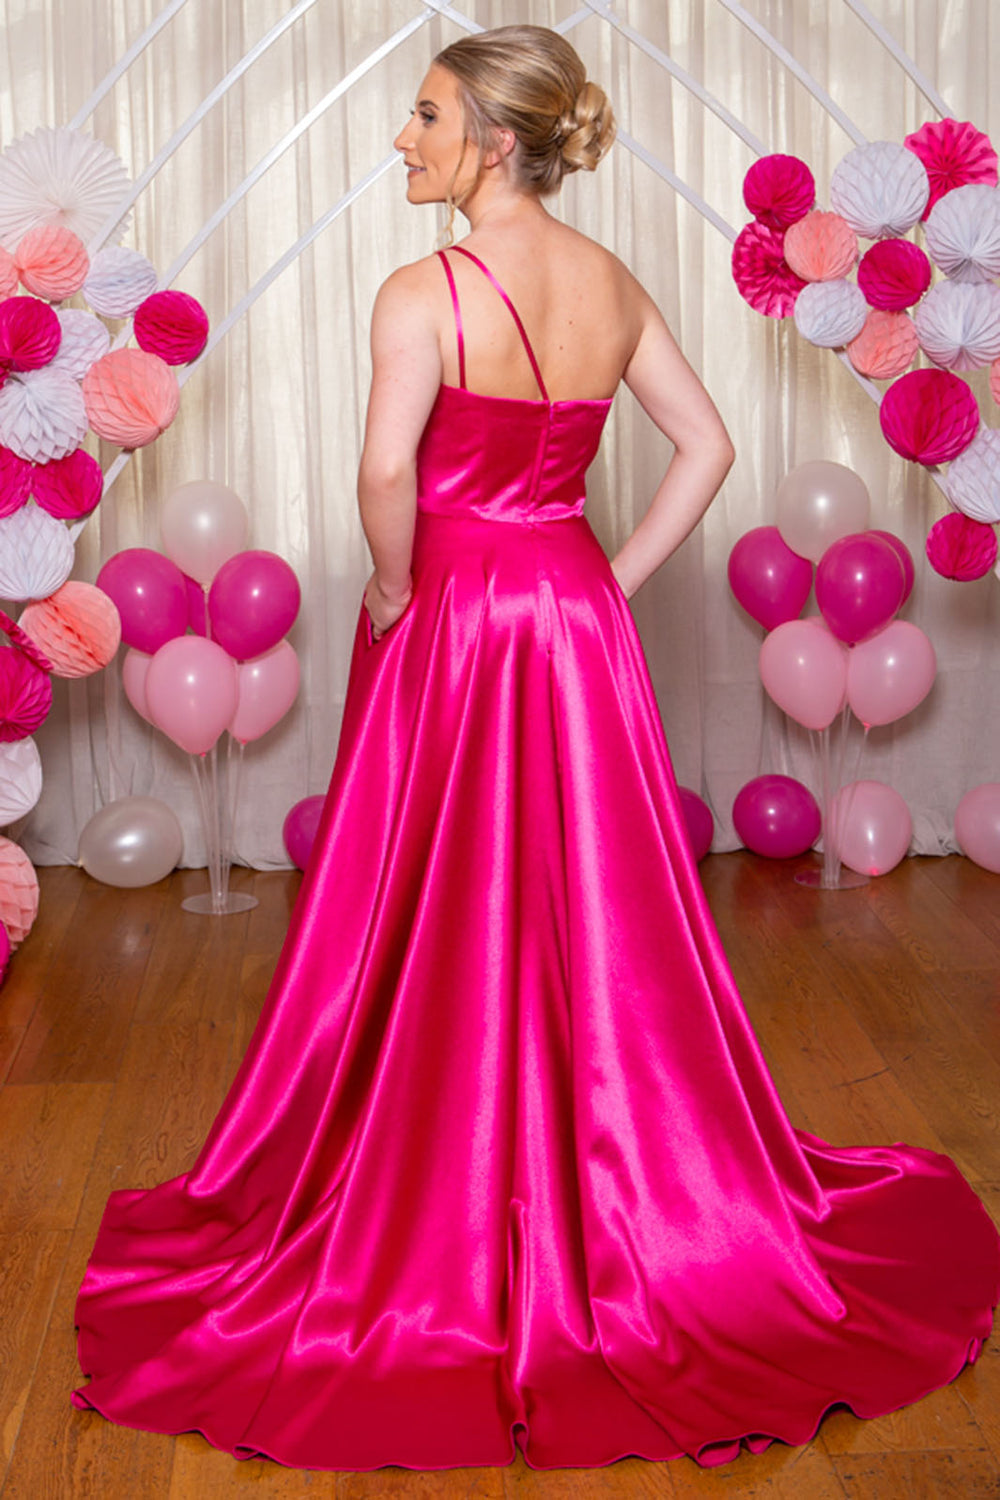 Prom Frocks PF9927 Hot Pink Satin Prom Dress With Train - Dotique Chesterfield